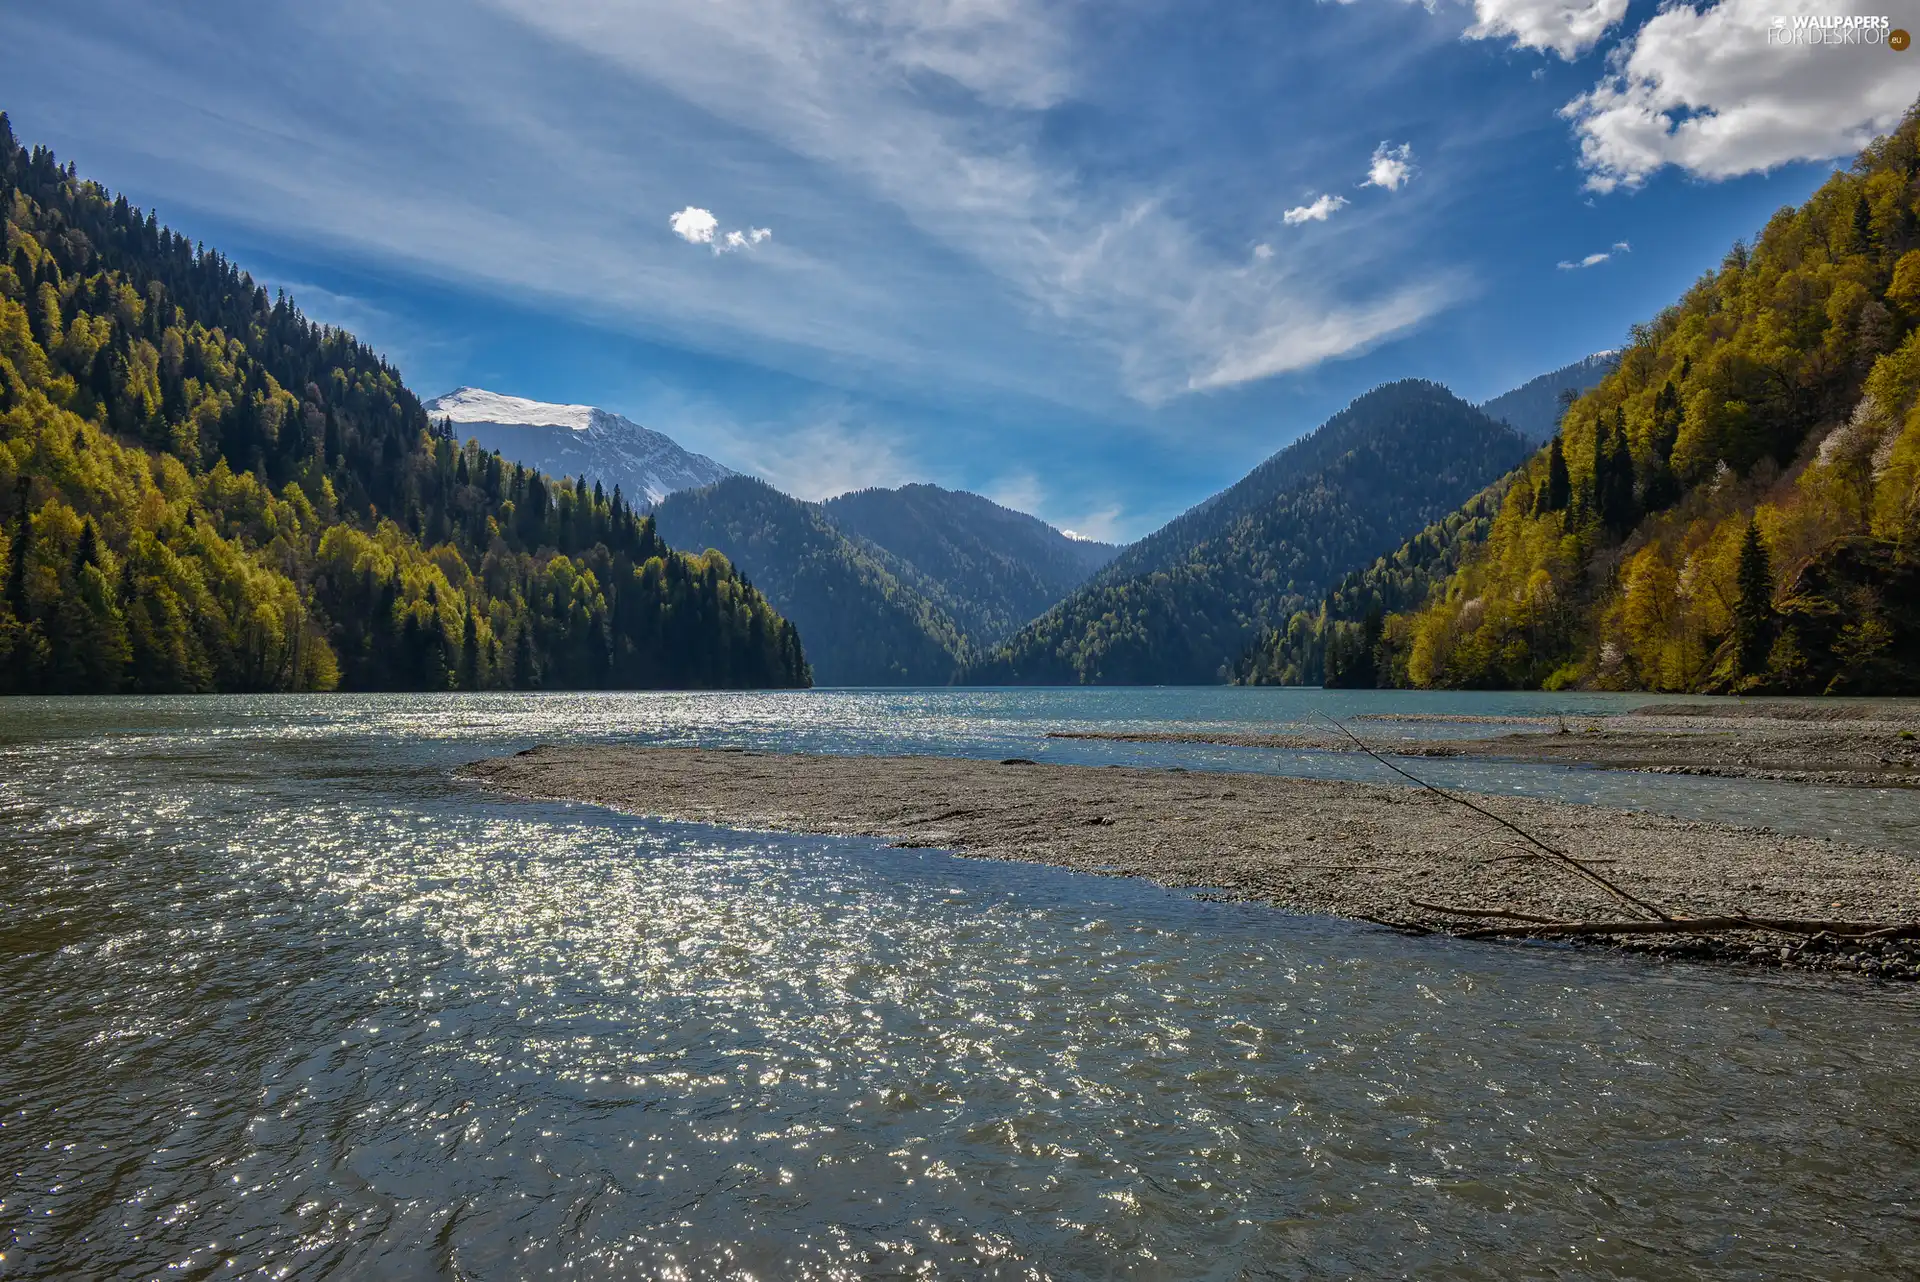 Sky, River, Mountains, forest